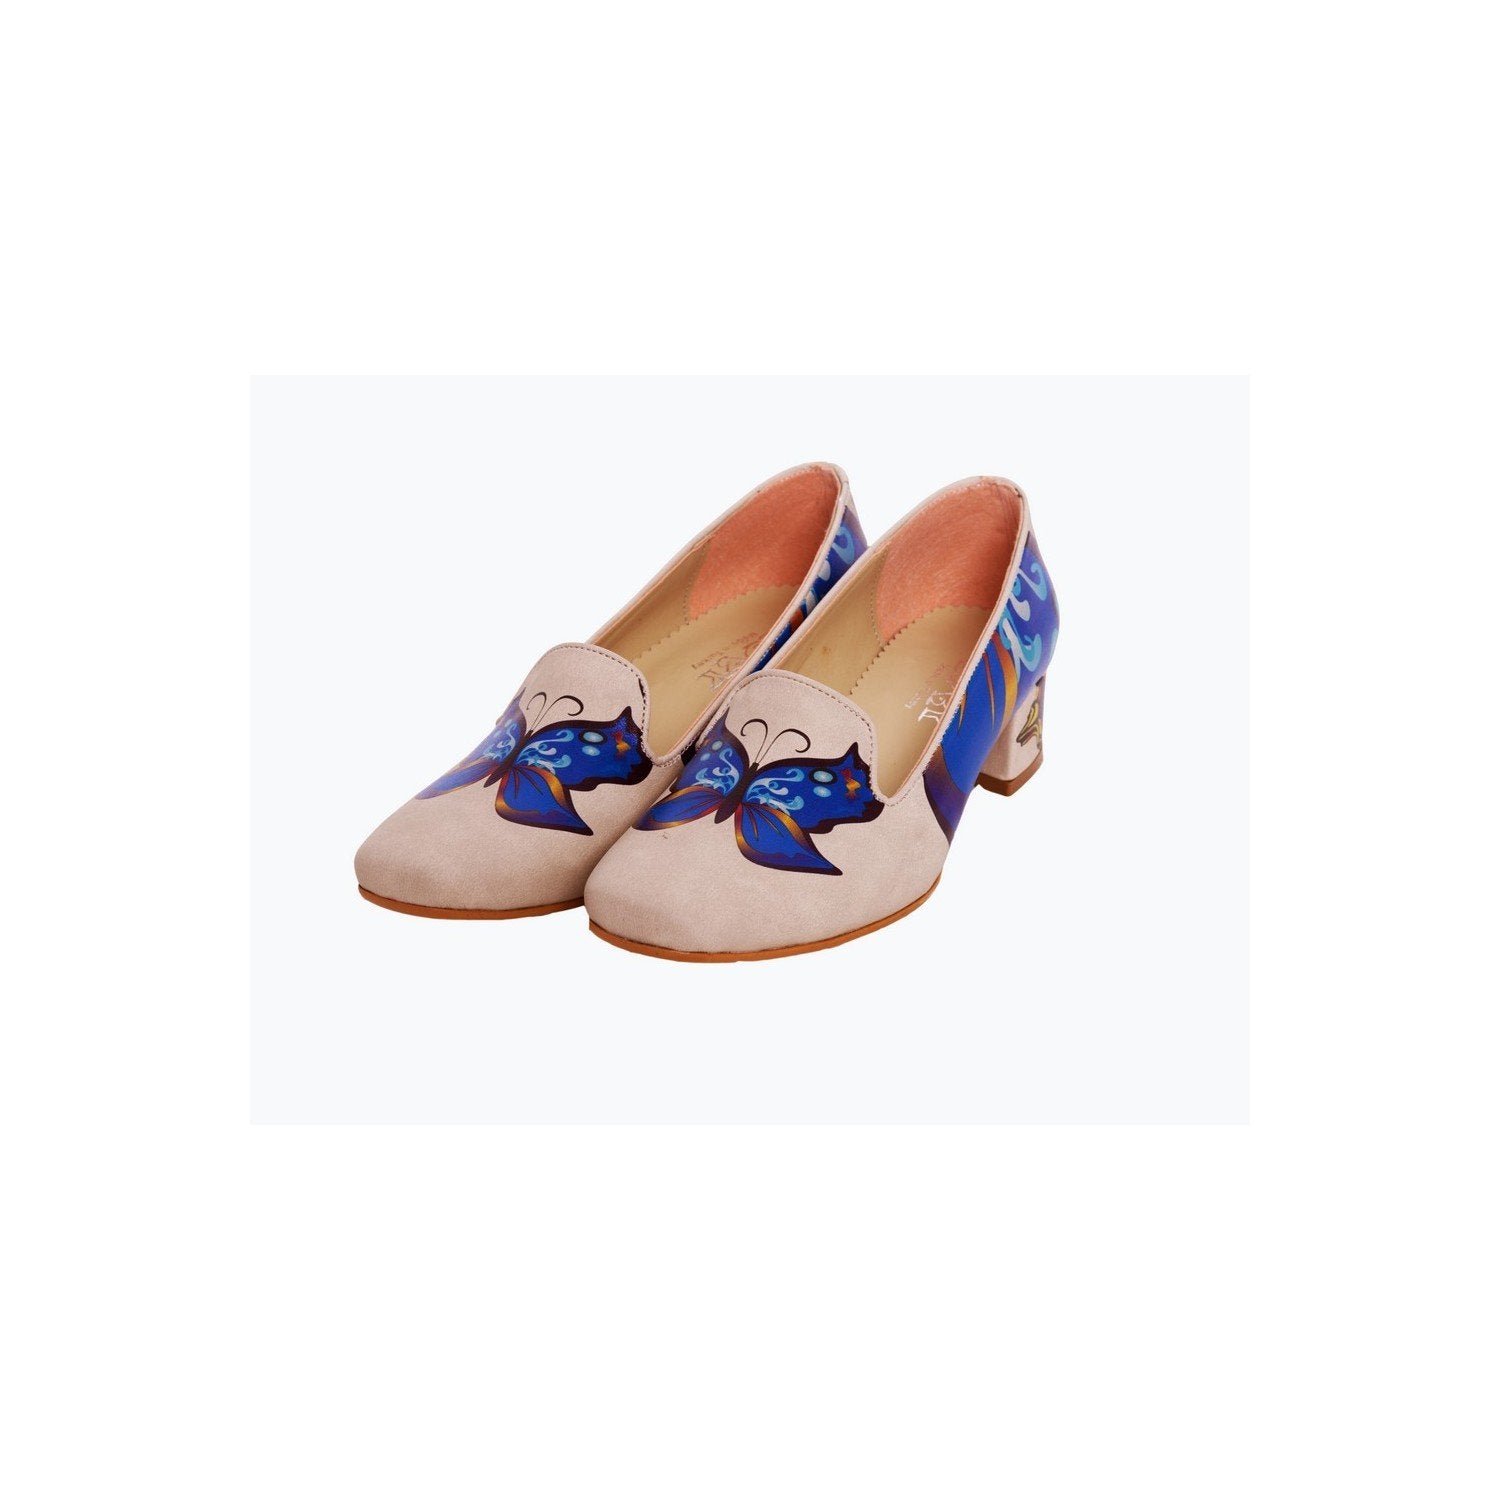 Butterfly Career Heel Shoes DB112 (1405803233376)